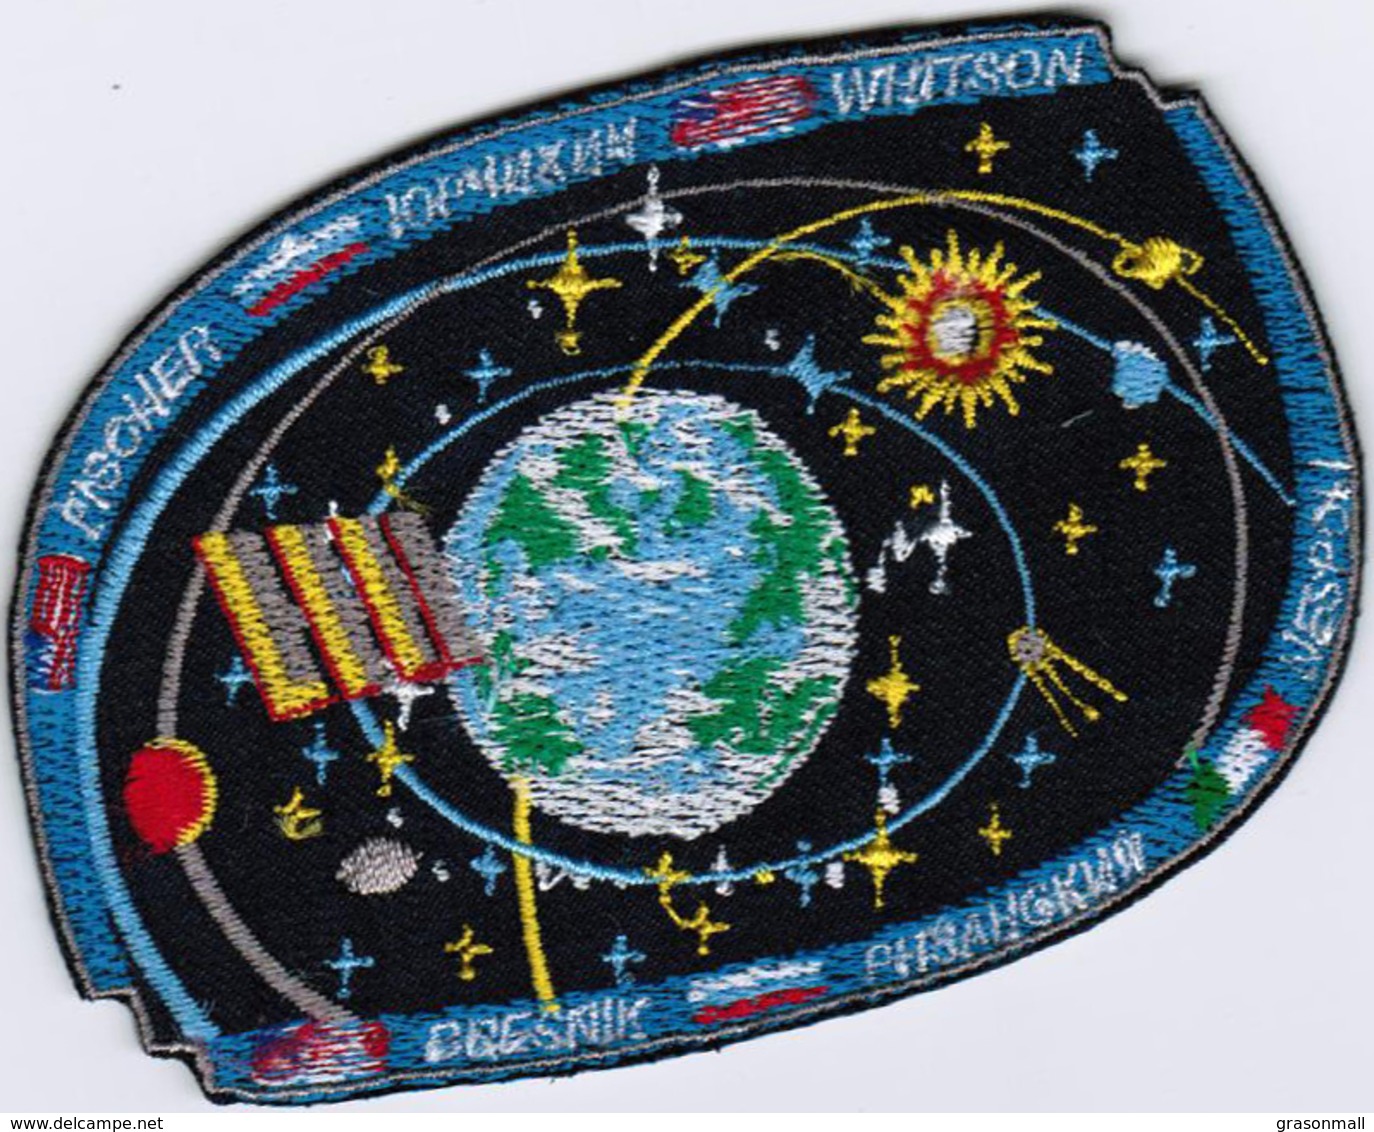 ISS Expedition 52 International Space Station Badge Iron On Embroidered Patch - Patches